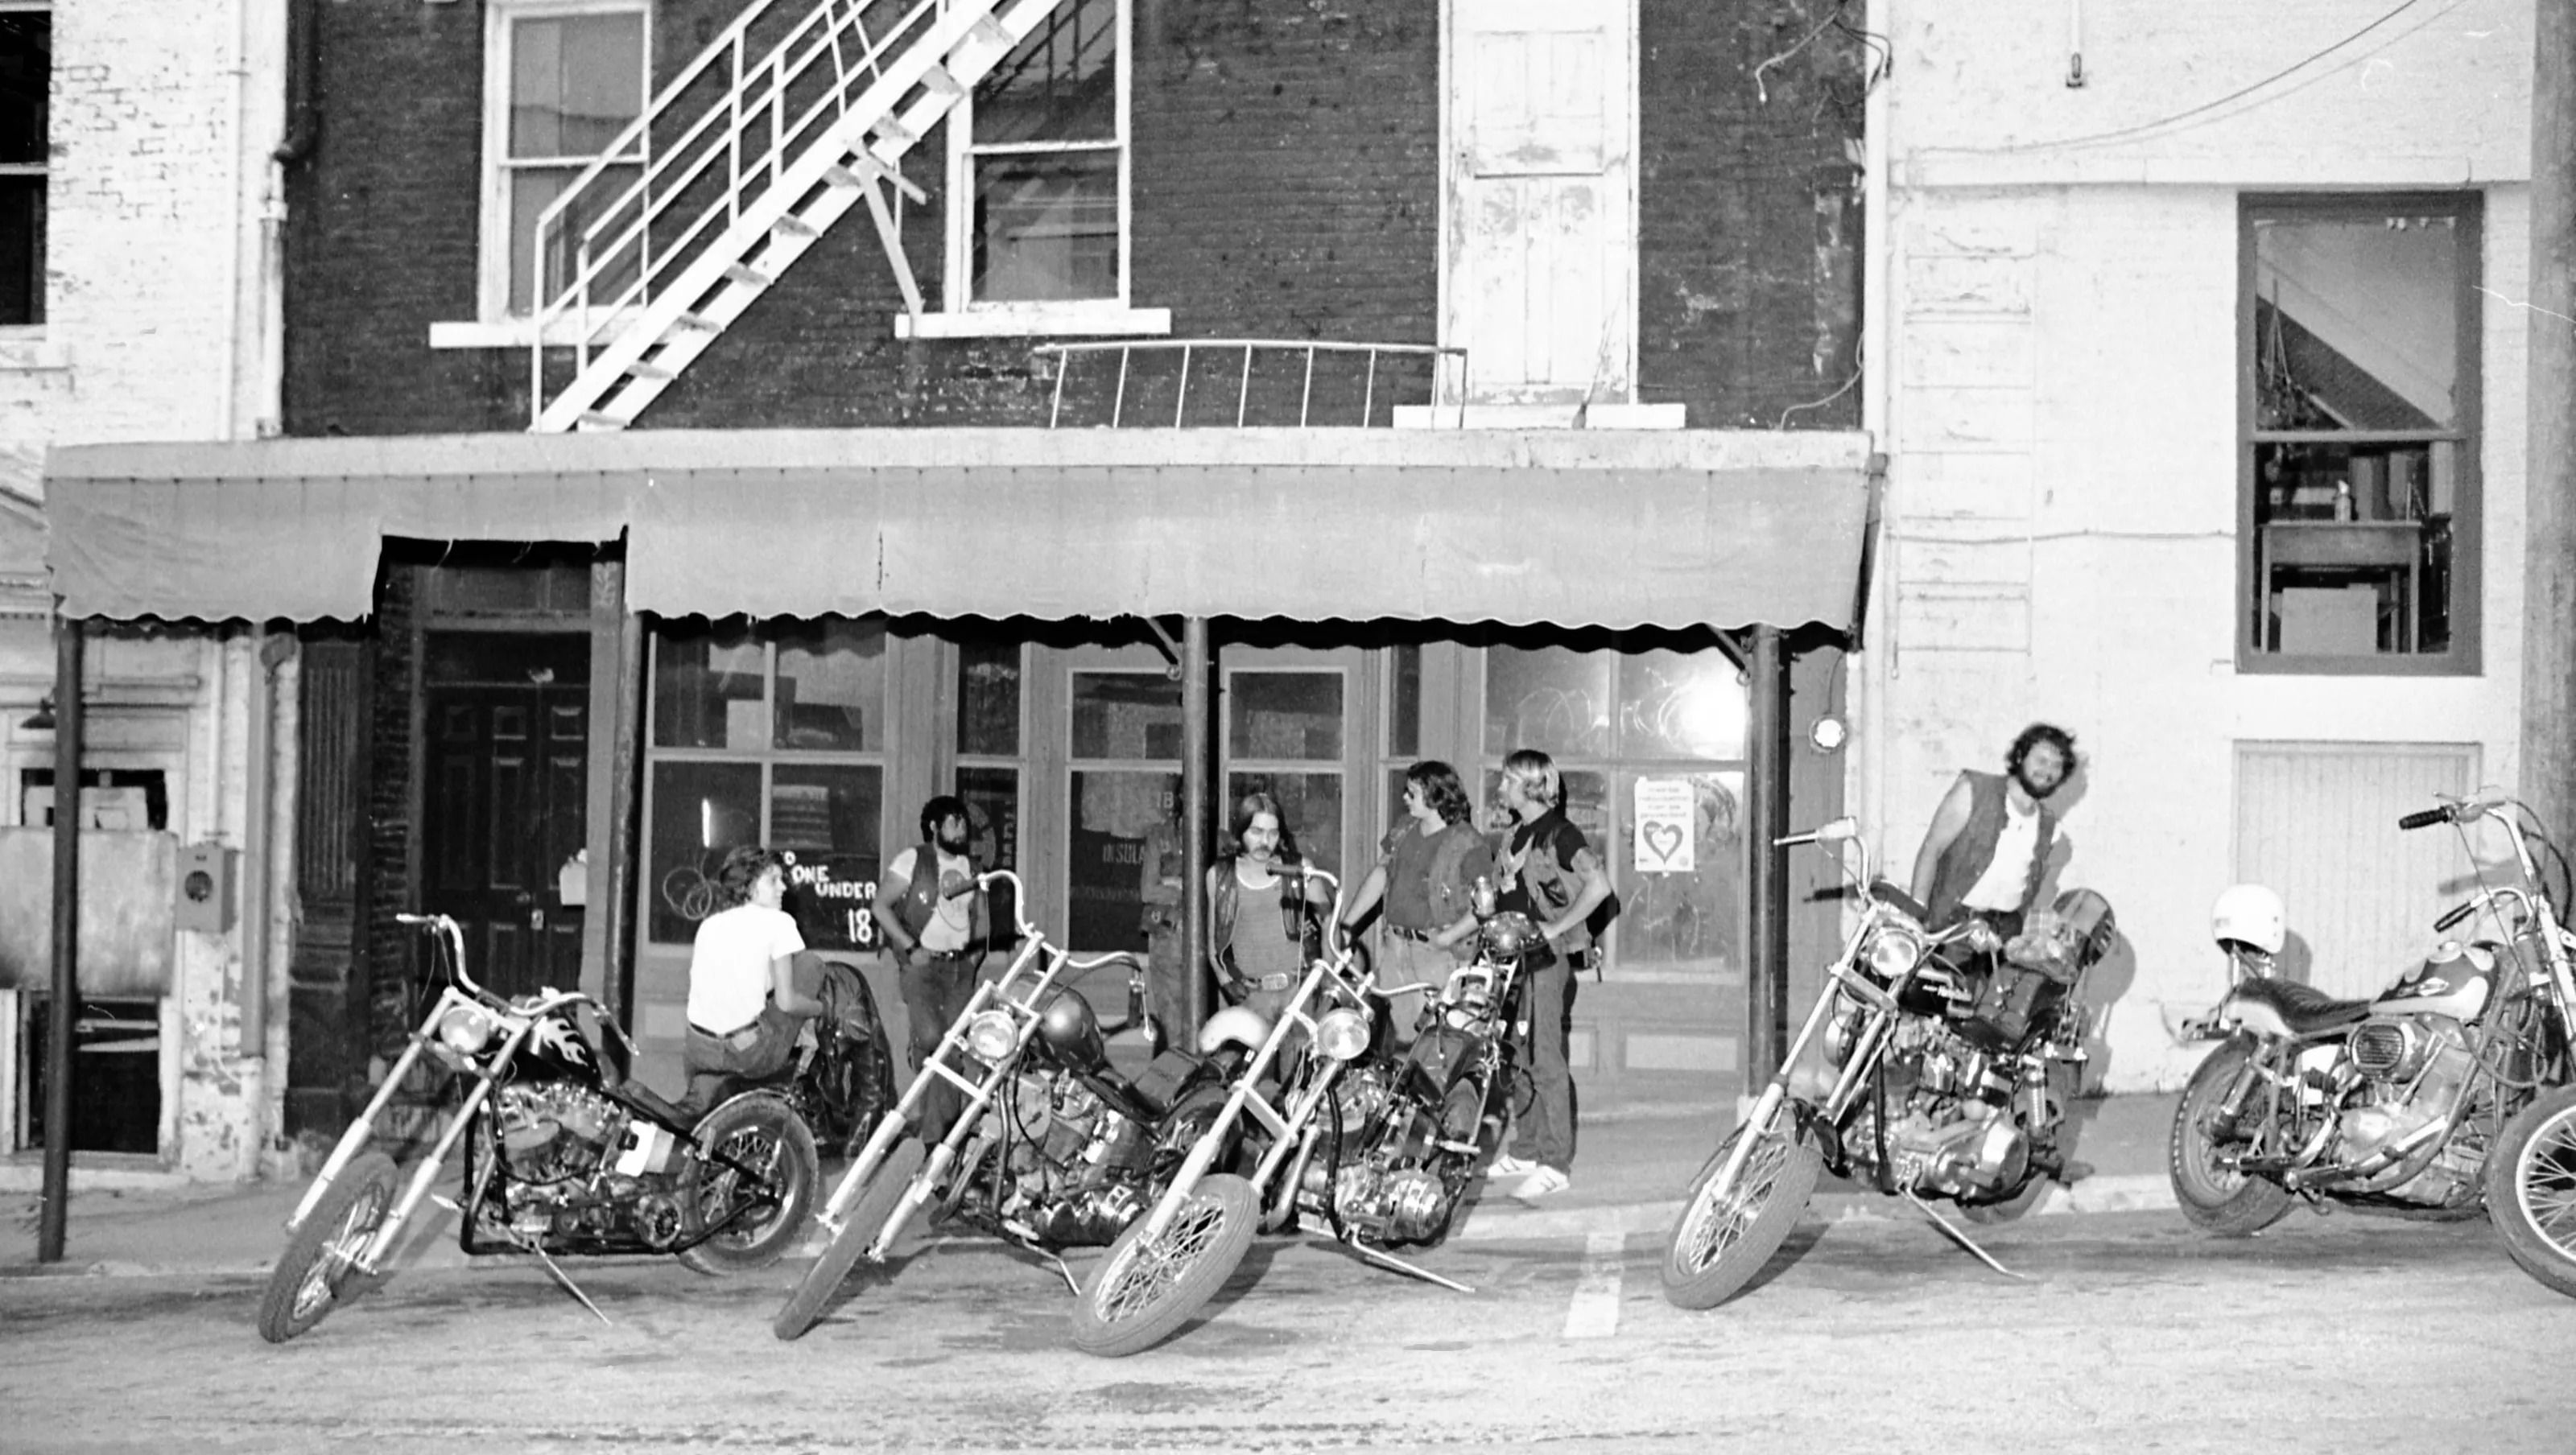 Grim Reapers Motorcycle Club in Southwest Indiana